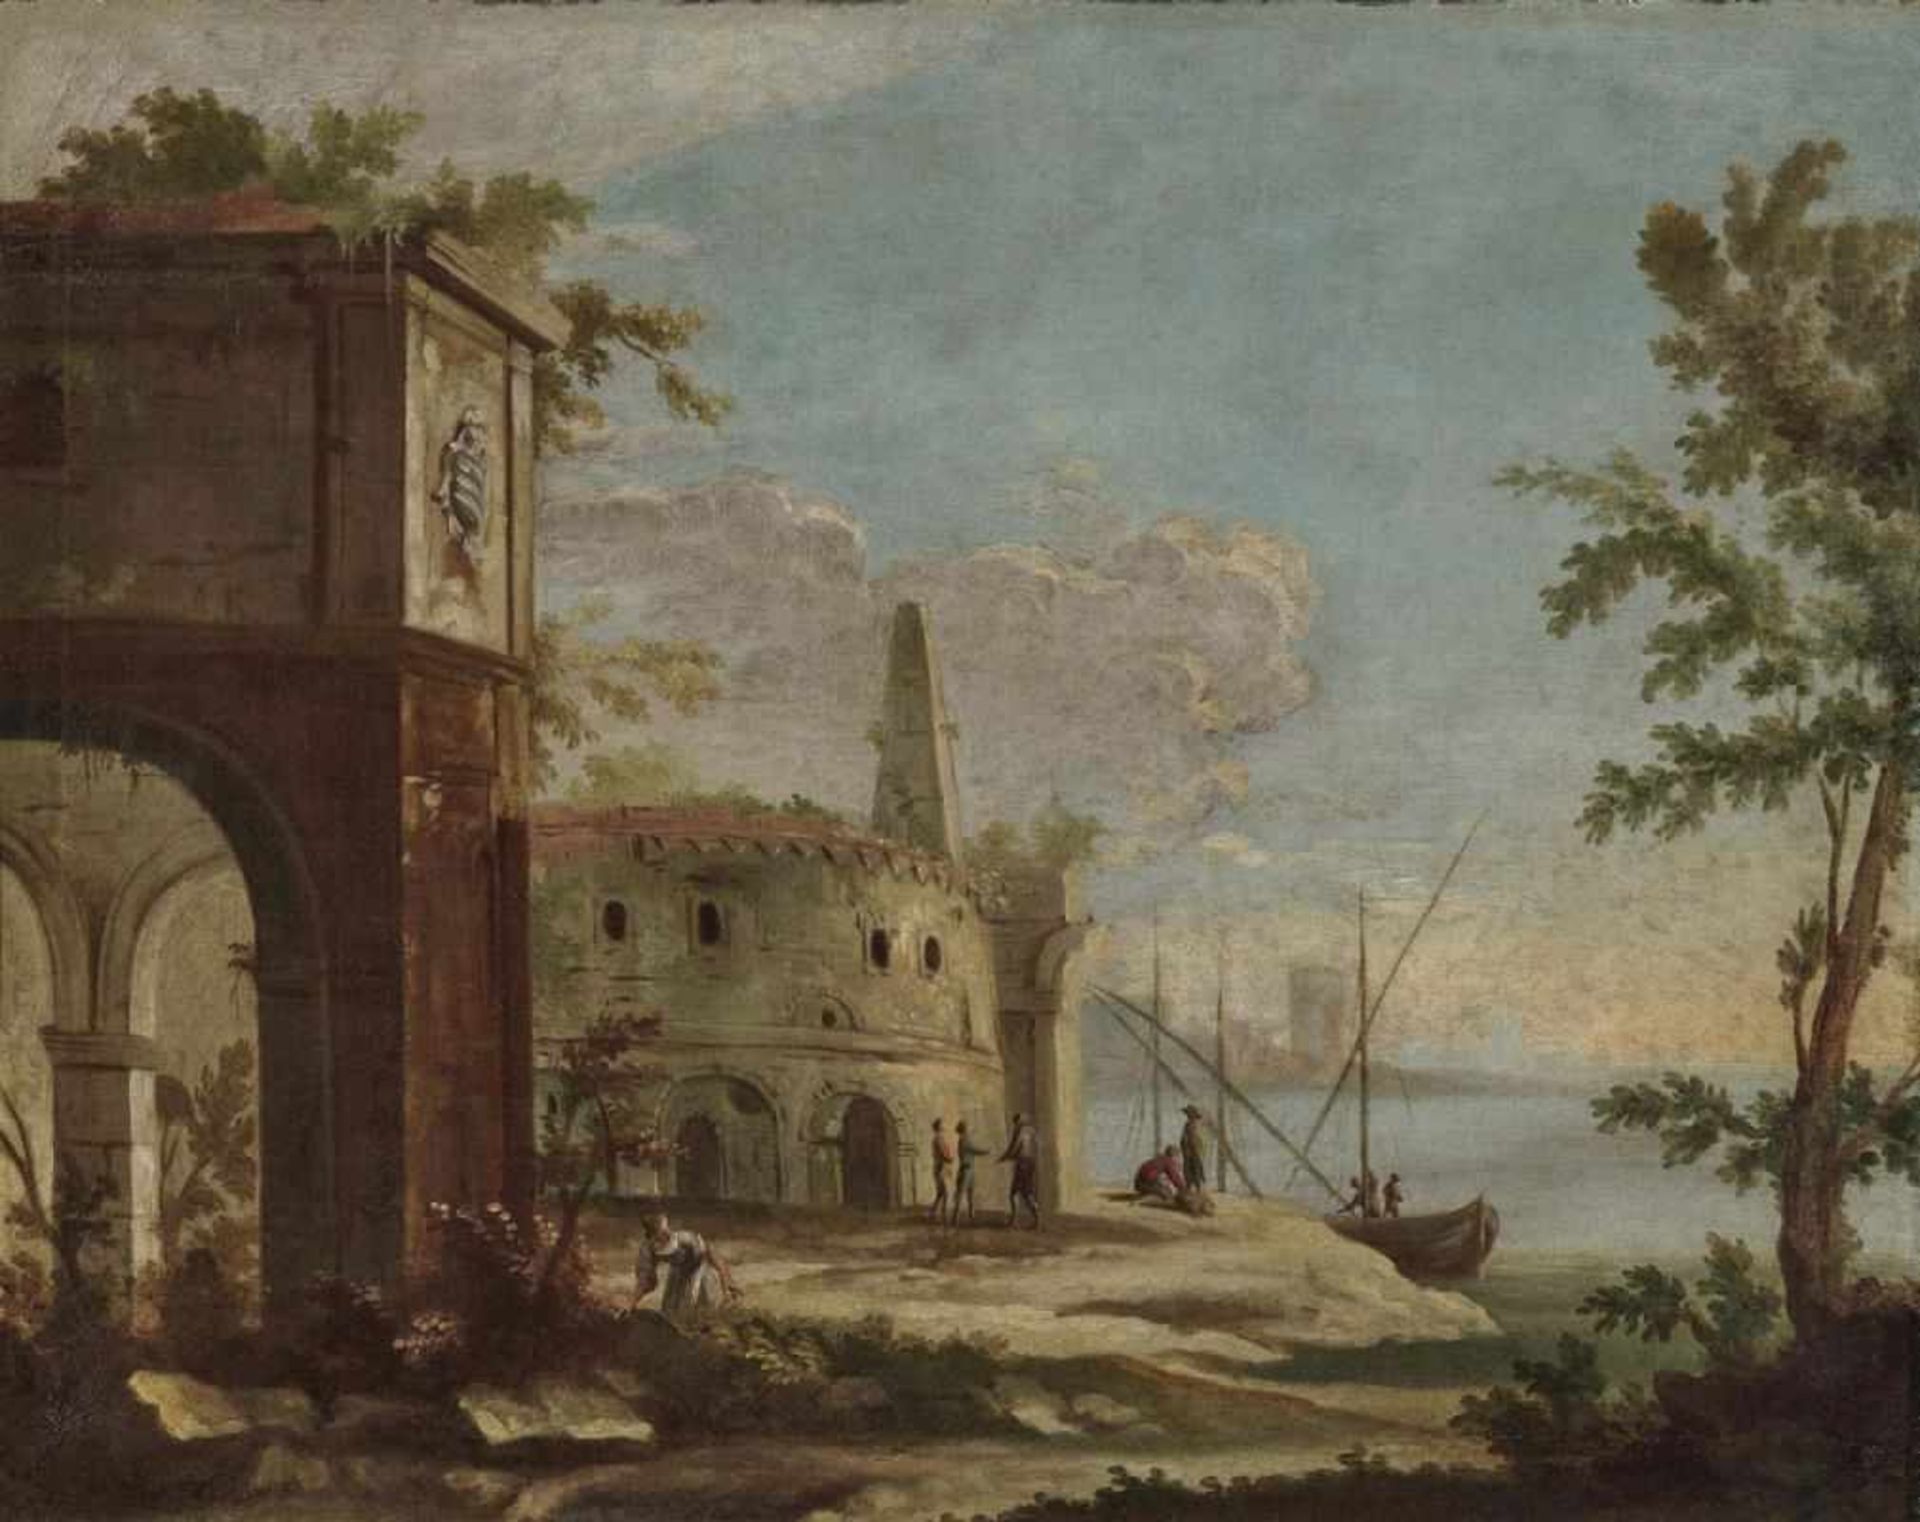 French School (?), 18th centuryShore Landscapes with Ruins and Figure Scenery Two paintings. Oil